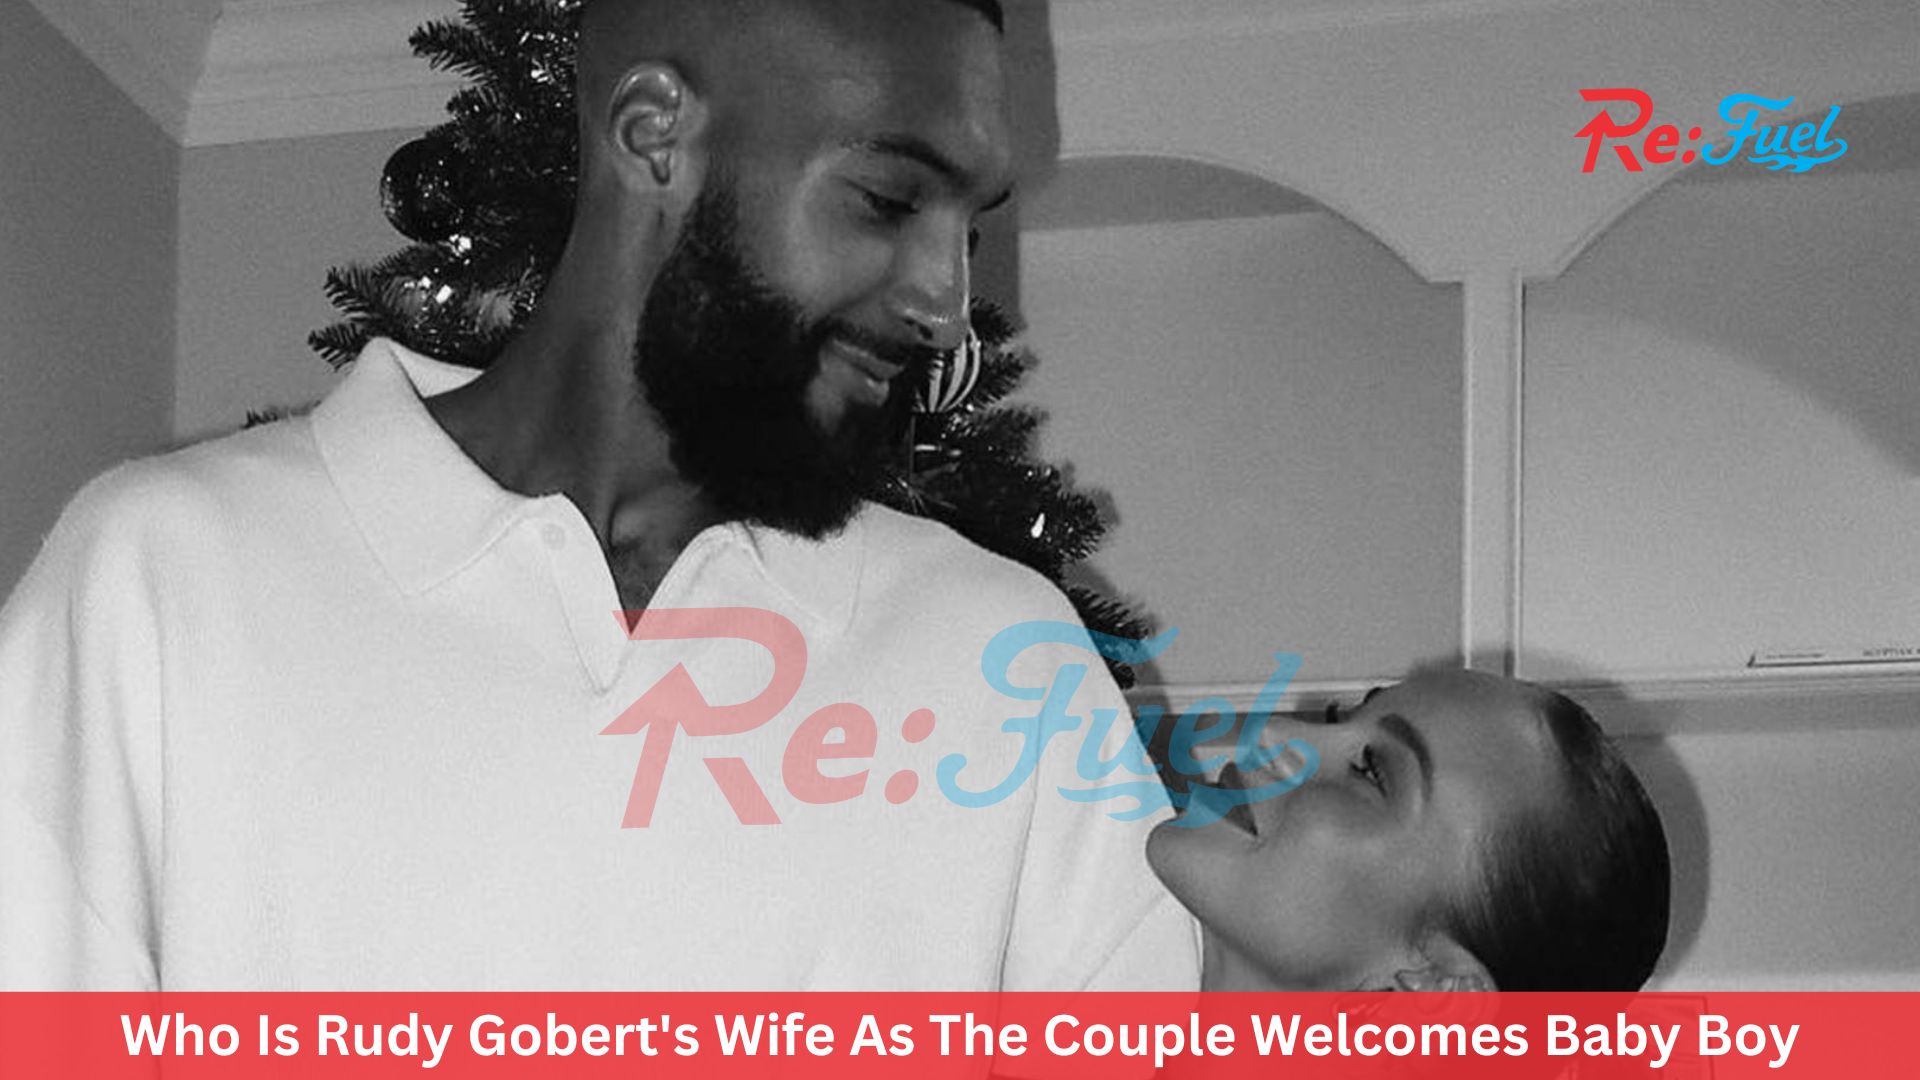 Who Is Rudy Gobert's Wife As The Couple Welcomes Baby Boy